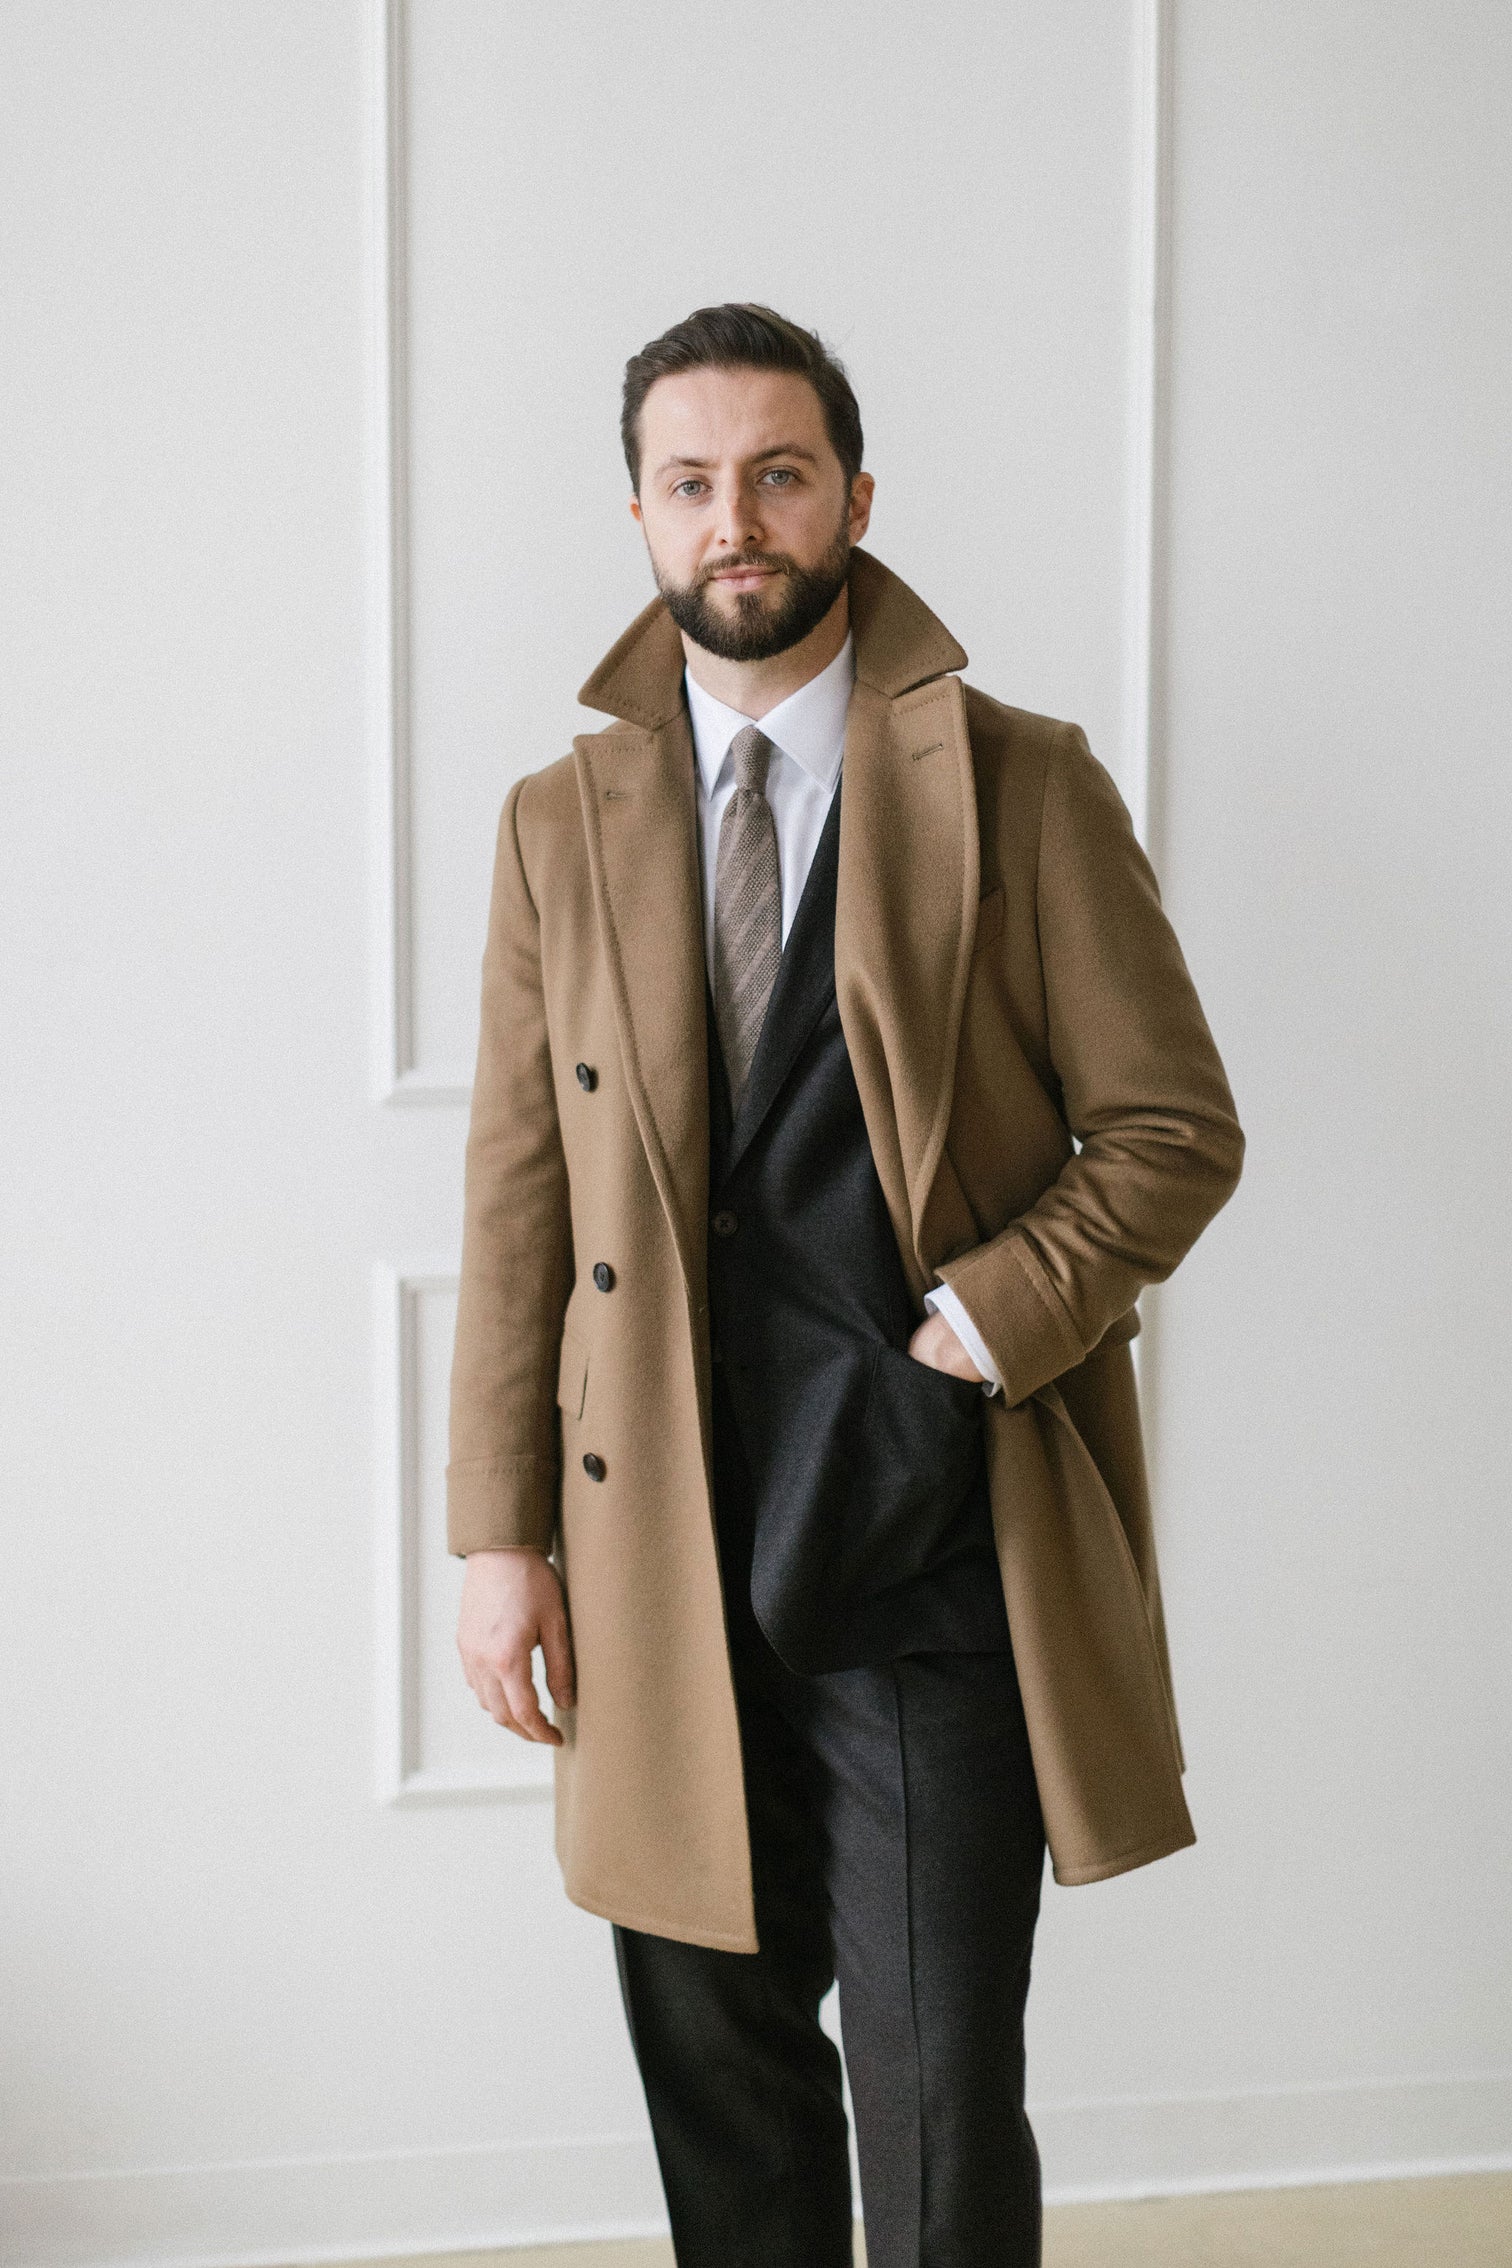 Mr. Cavaliere - Tailored for Life